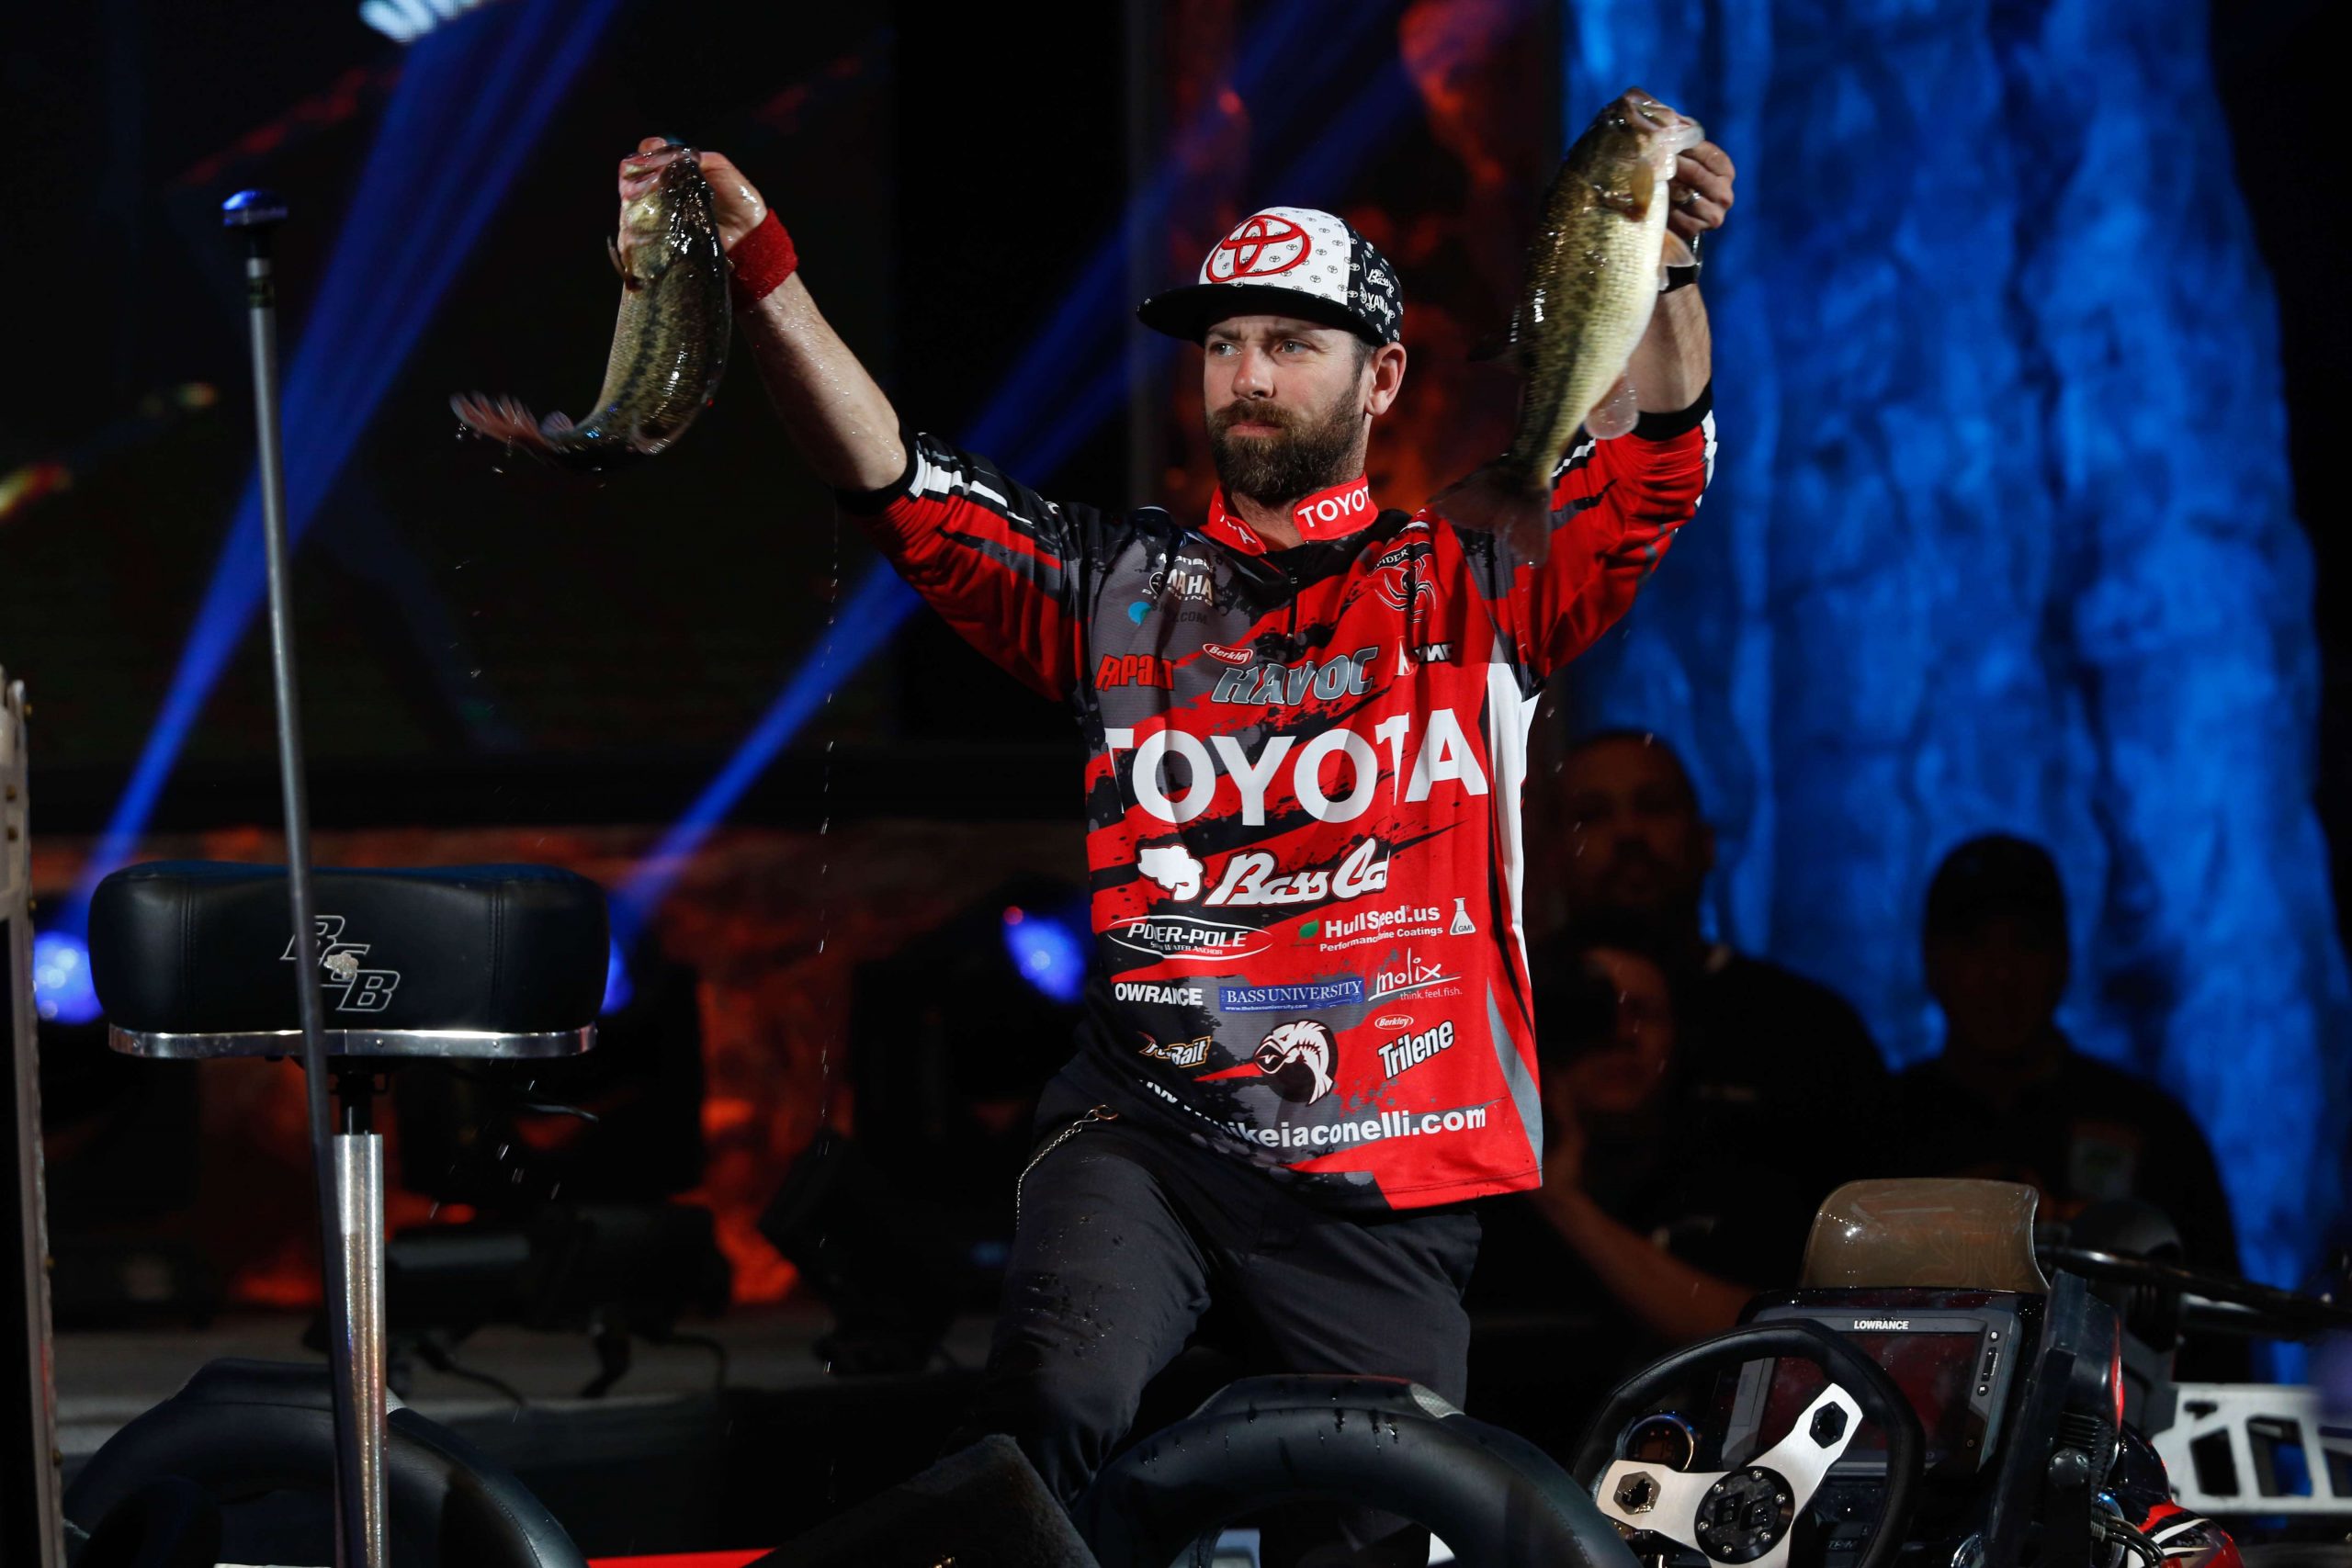 Mike Iaconelli was tied with Cliff Pace after Day 1, but fell a little bit short. Still a very respectable fourth place finish by Ike.